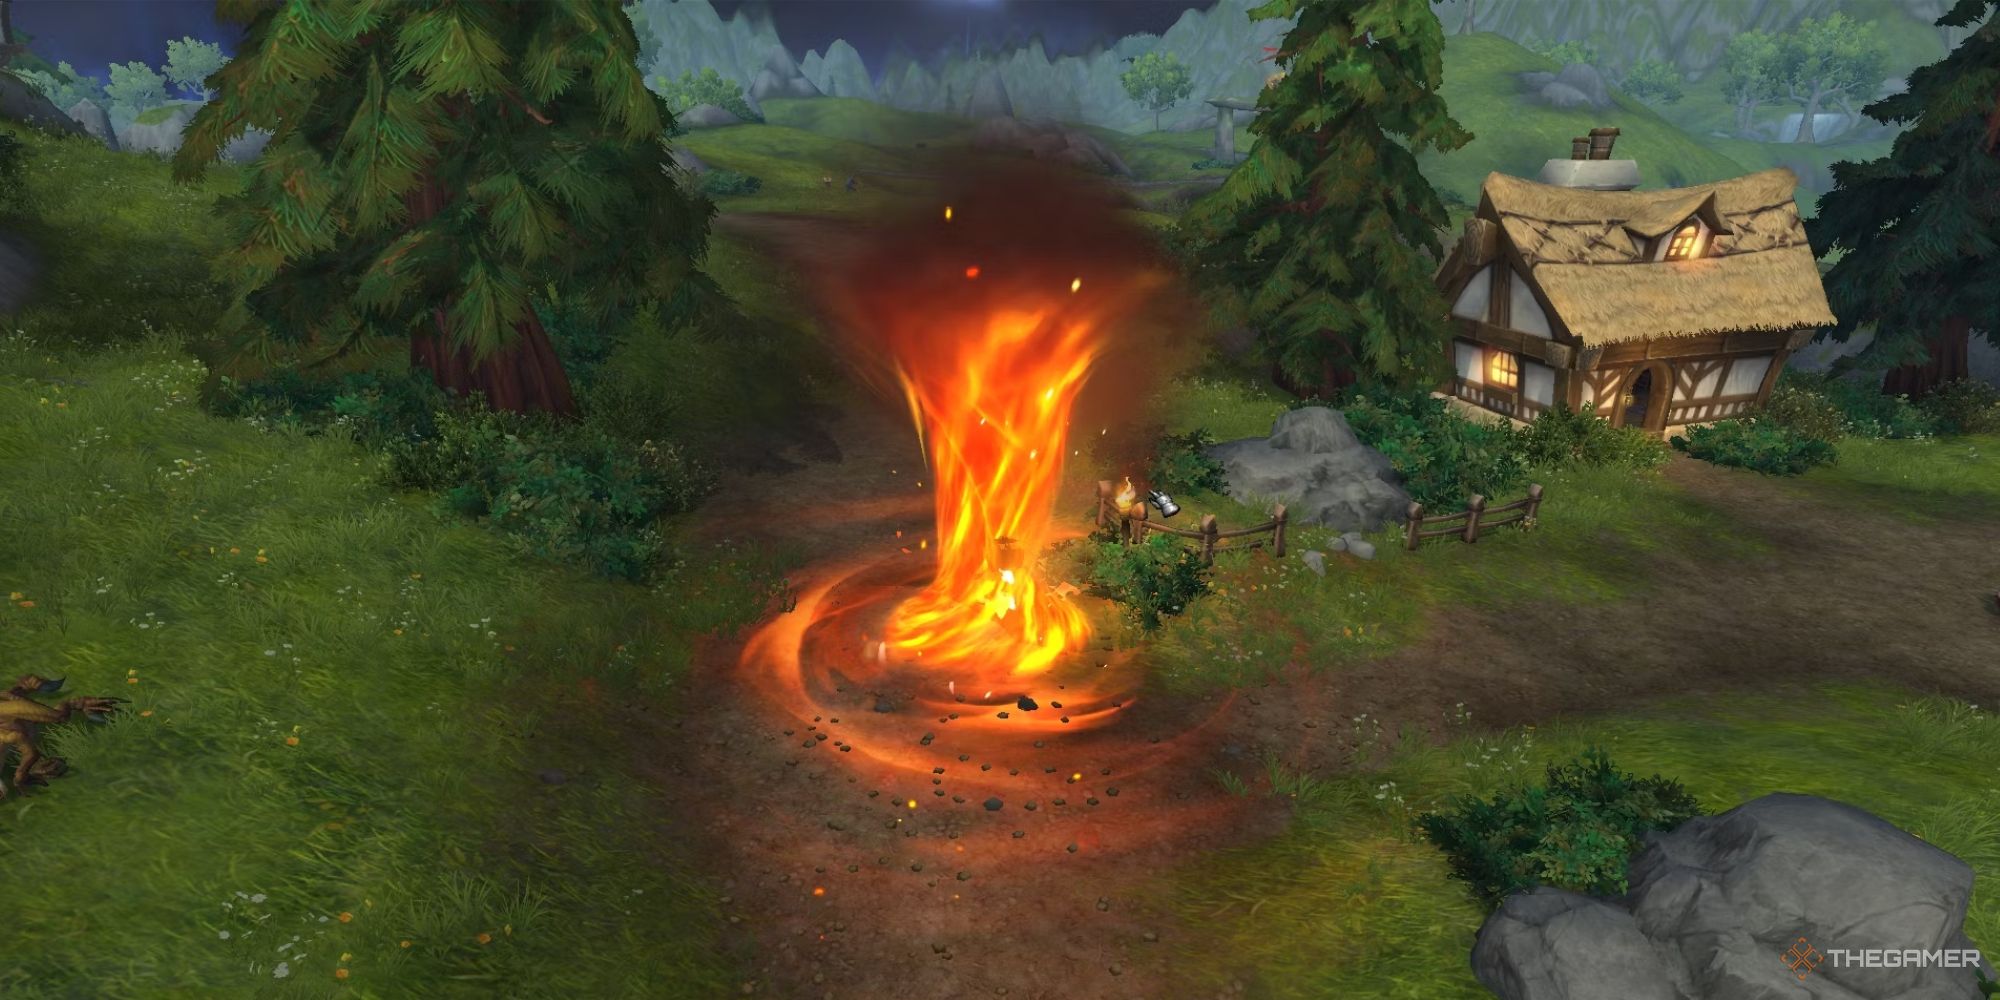 Using Fire Whirl to chase and damage enemies in World of Warcraft Plunderstorm